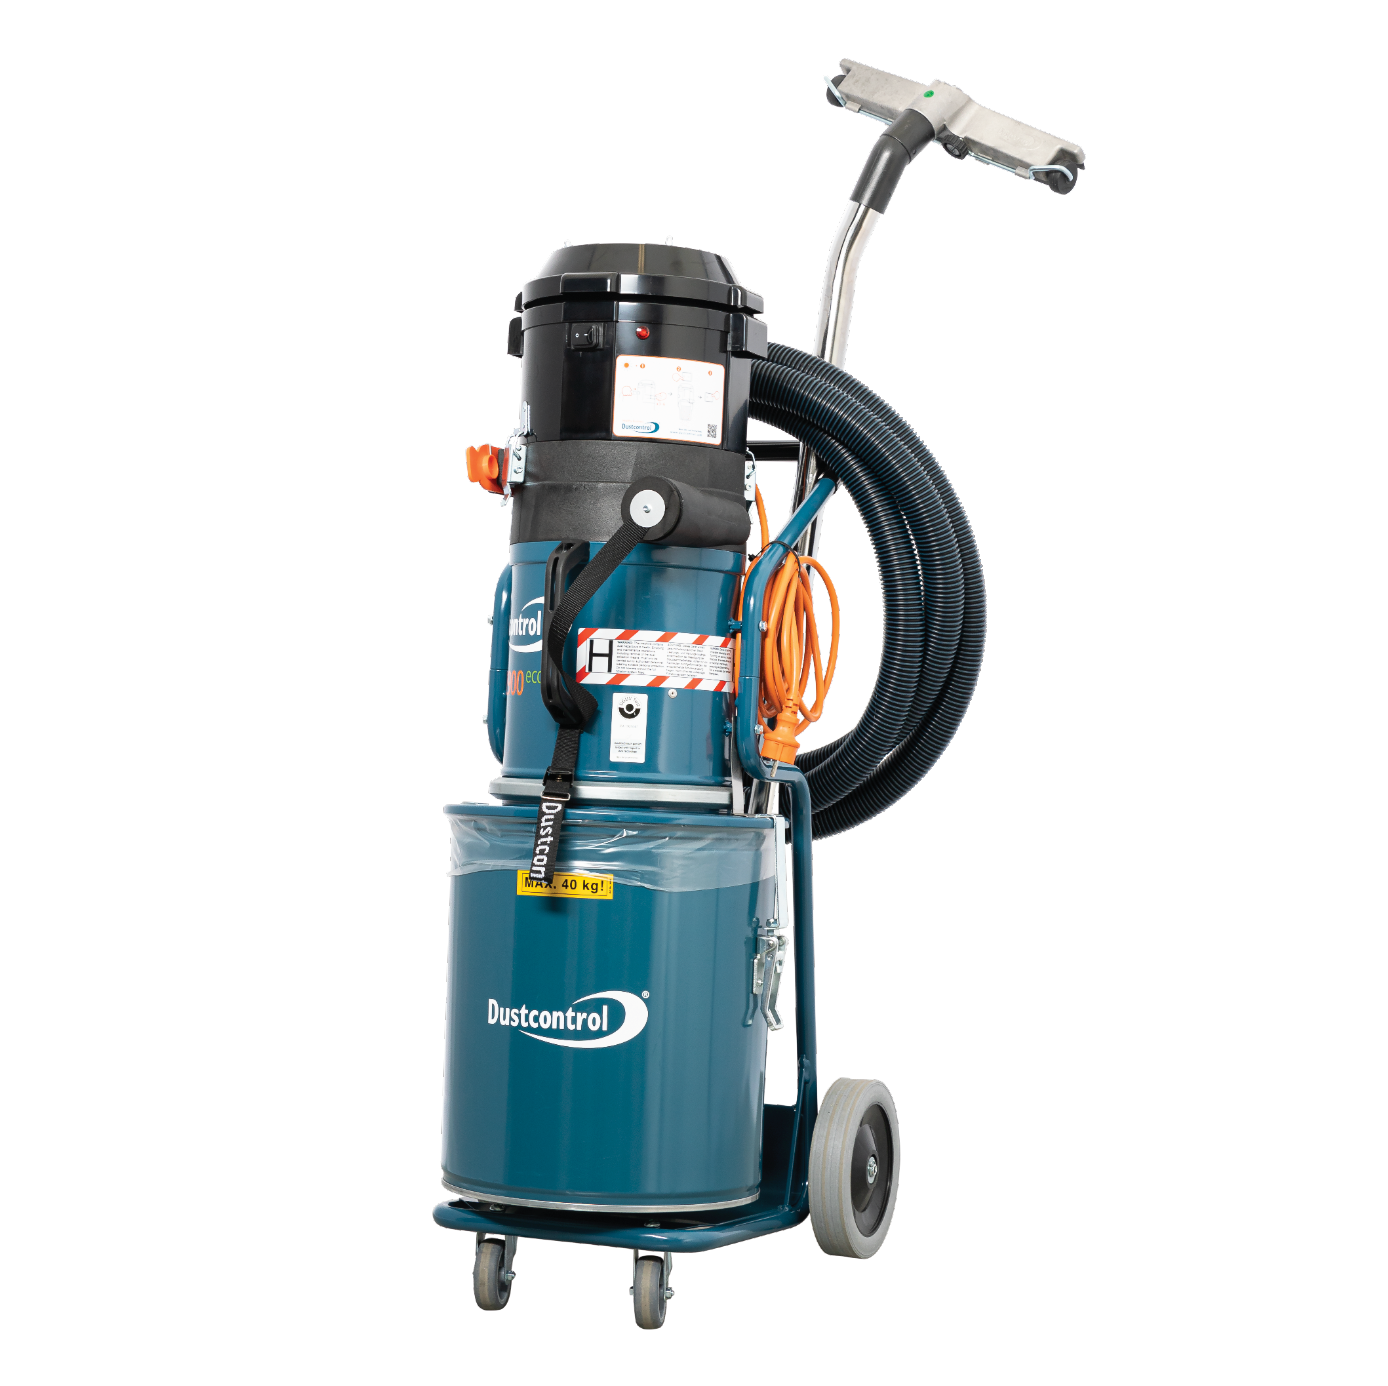 Dustcontrol  DC2900a  Vacuum, Single Phase, 1285watt, 22kg, Includes 40L Steel Collection Container, 5m Antistatic Suction Hose 38mm, Floor Nozzle (7235), Suction Pipe (7257), Polyester Fine Filter Cellulose (42029) and HEPA H13 filter (42027)